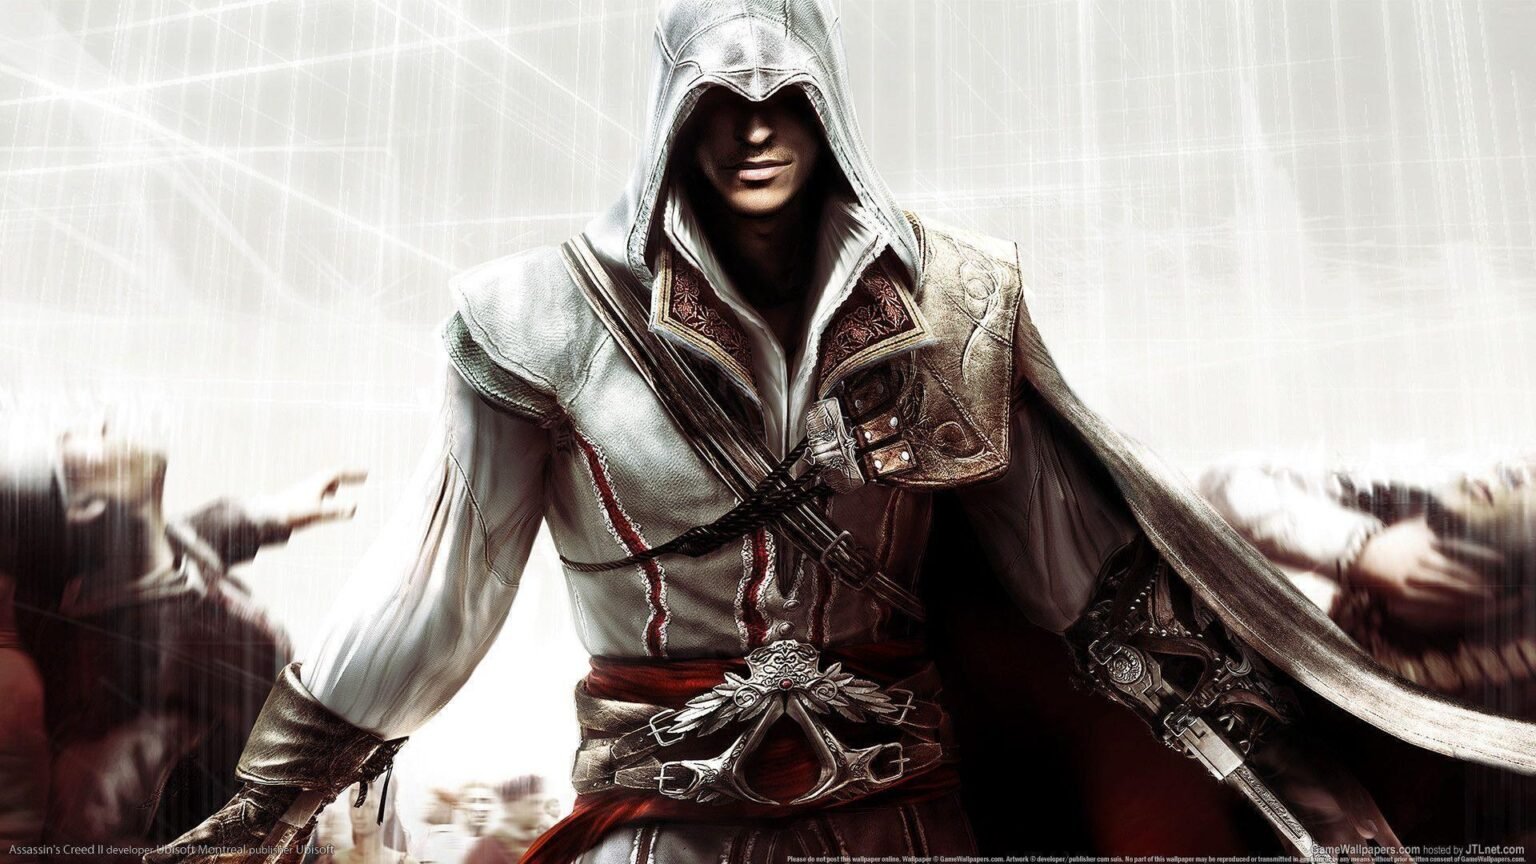 ArGUABLY THE MOST POPULAR ASSASSIN OF THE SERIES EZIO AUDITORE DA FIRENZE, FLORENTINE NOBLEMAN, MASTER ASSASSIN AND MENTOR TO THE ITALIAN BROTHERHOOD WILL BE OBTAINABLE IN VARIOUS APPEARANCES IN Assassin's Creed Universes Beyond